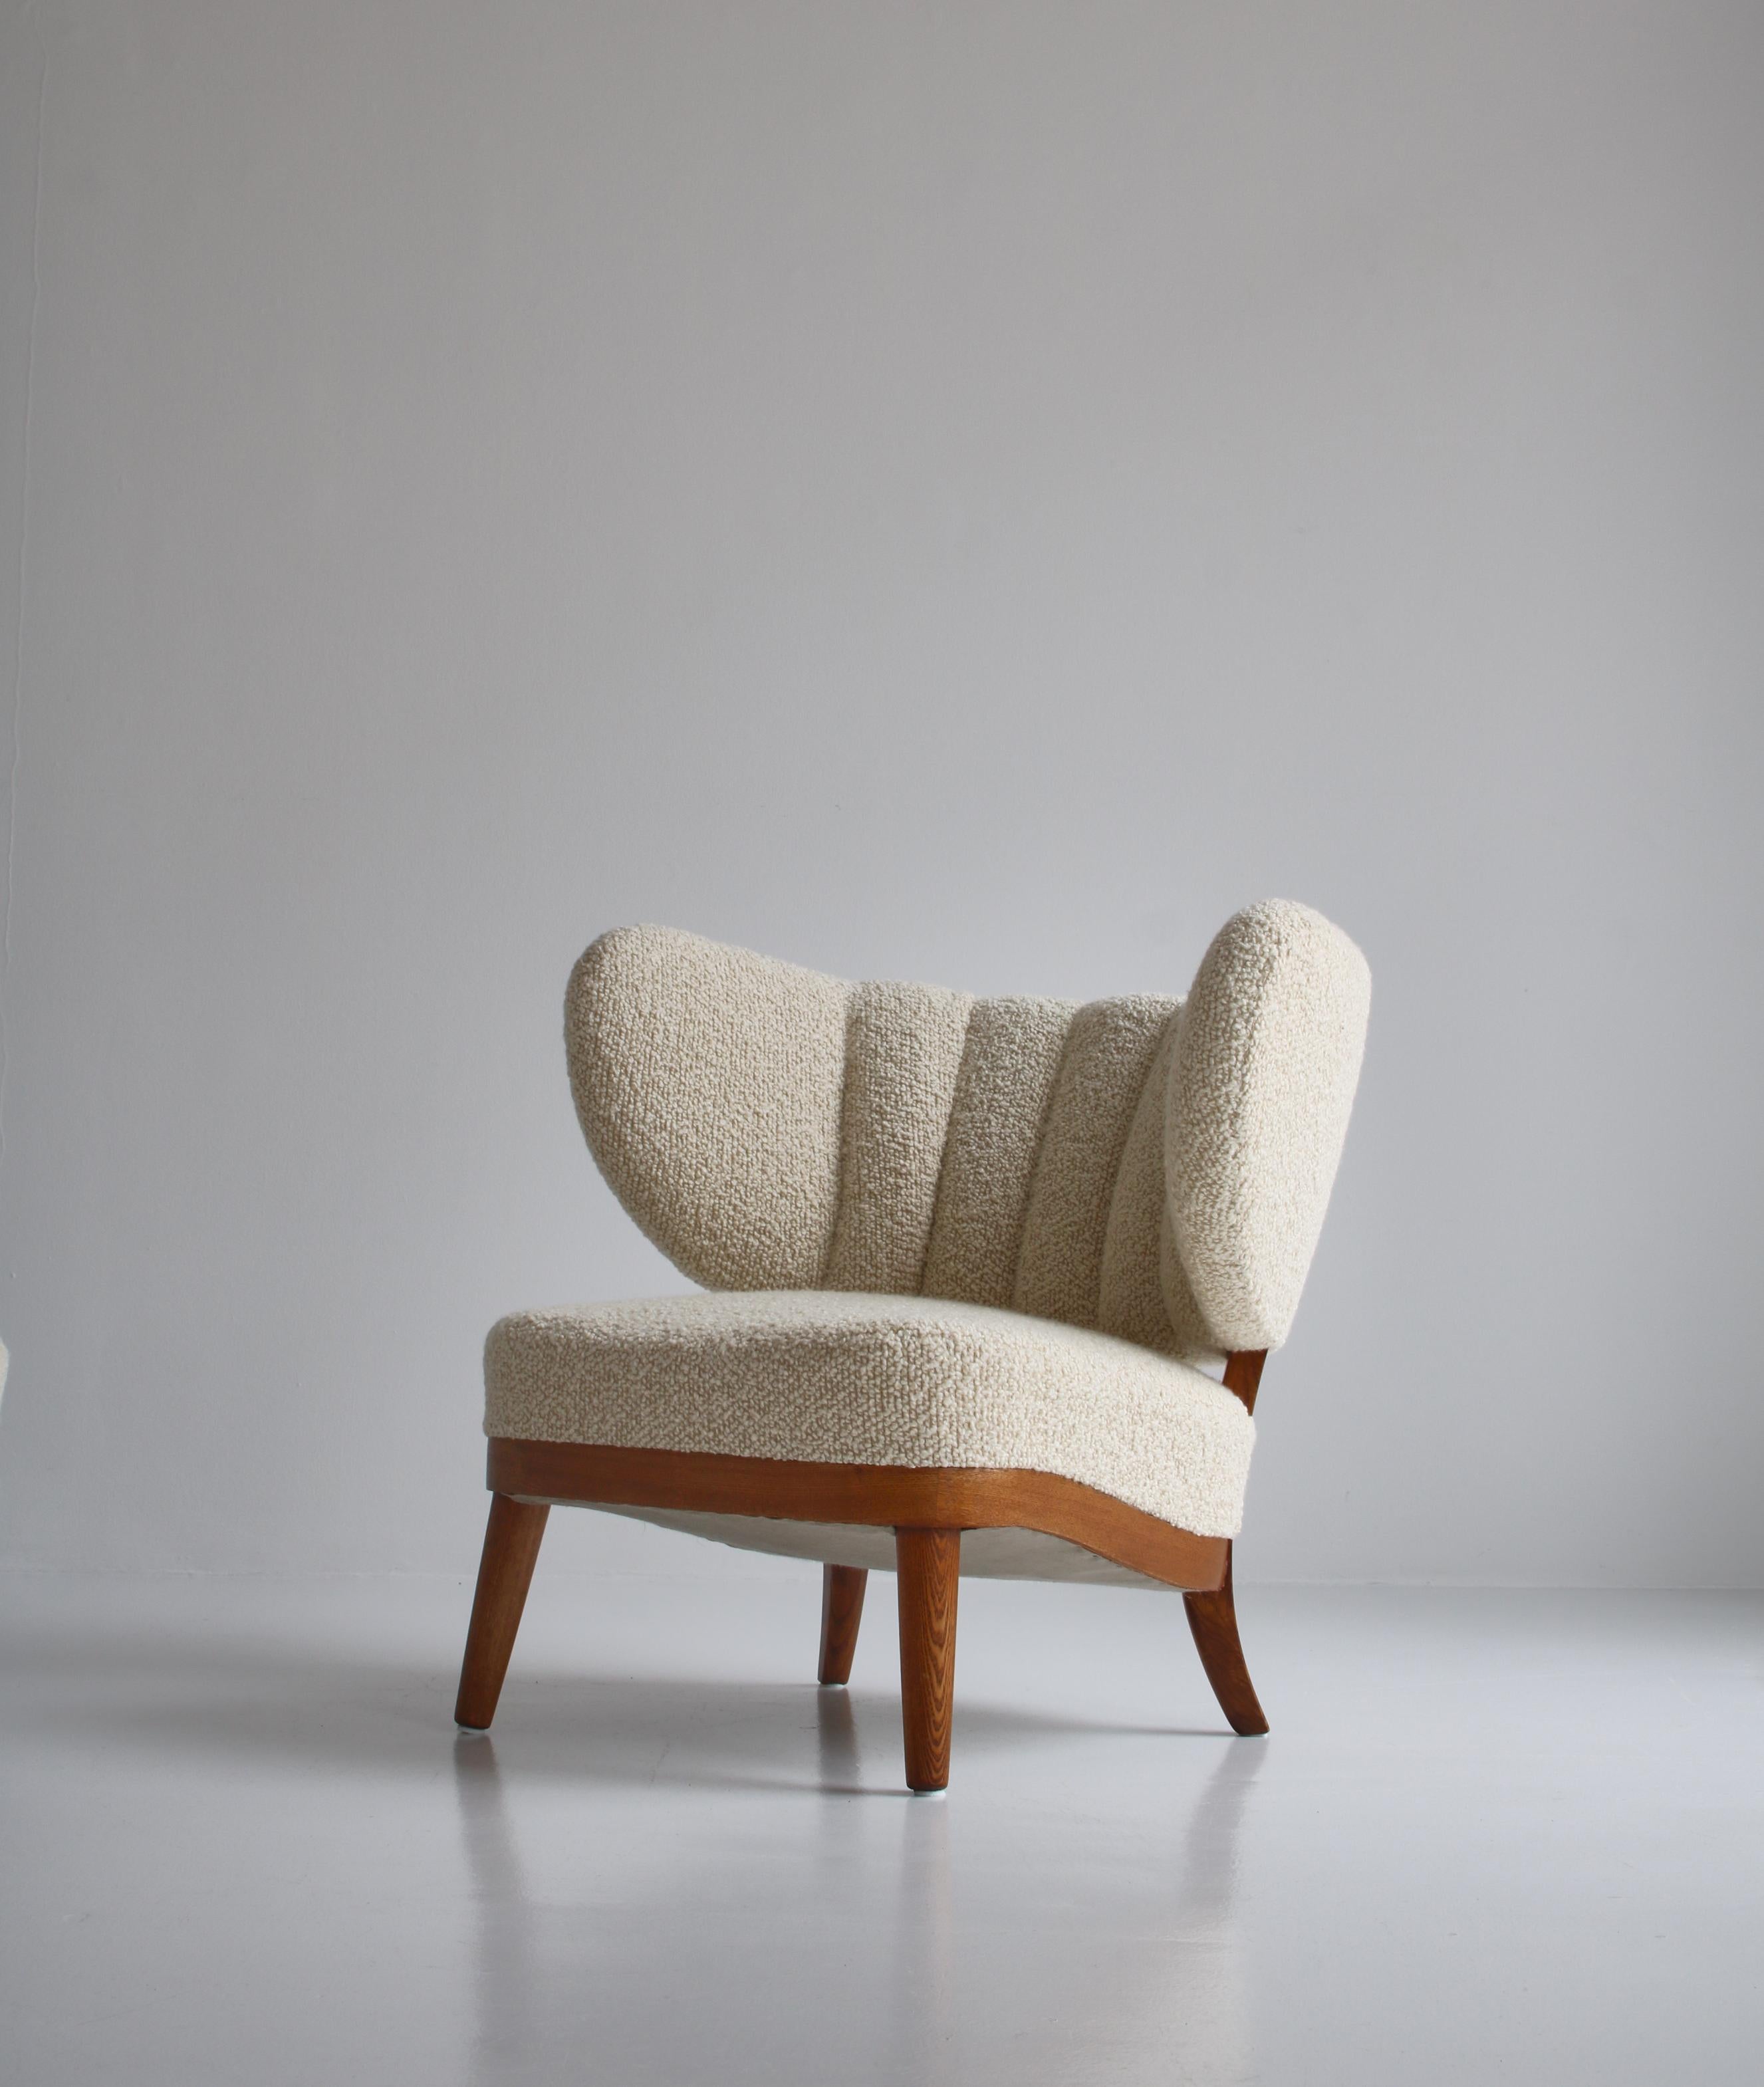 Elm 1940's Lounge Chairs in White Boucle, Otto Schulz for Boet, Scandinavian Modern